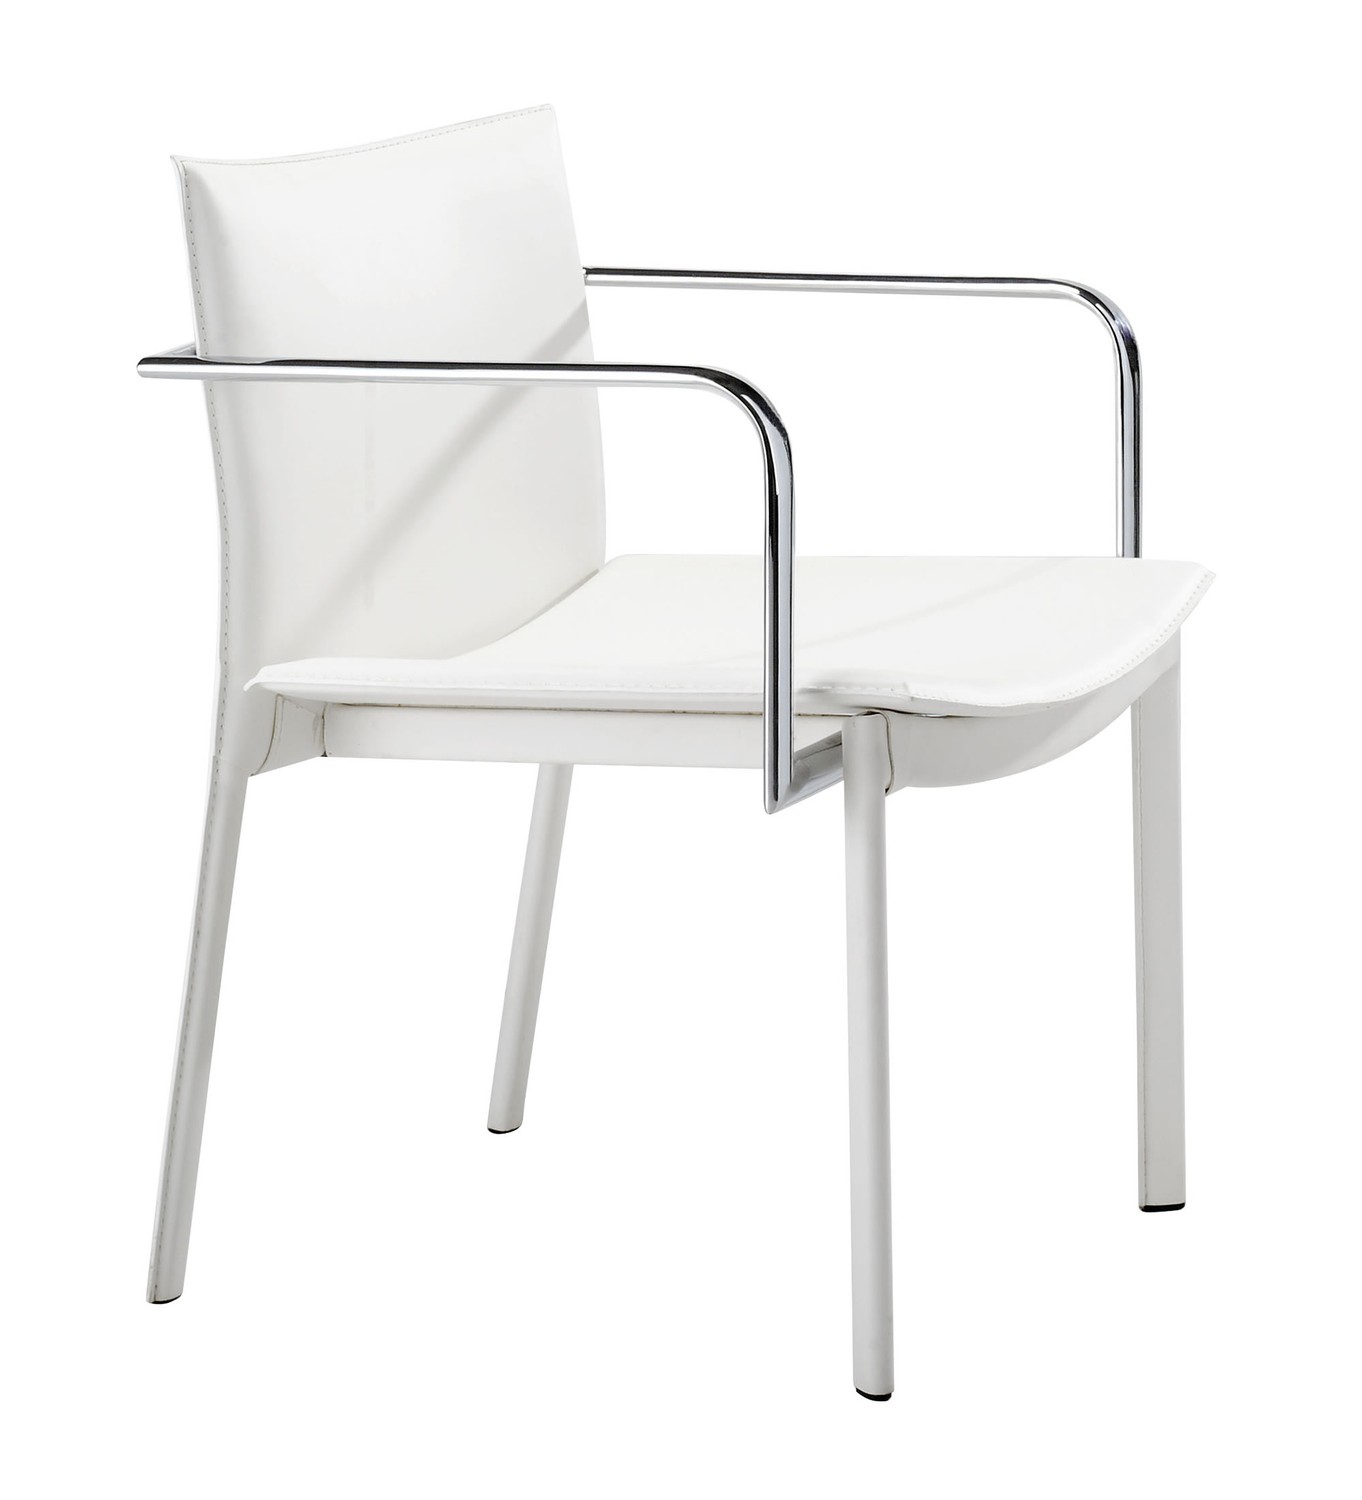 24" x 22" x 28" White, Leatherette, Chromed Steel, Conference Chair - Set of 2